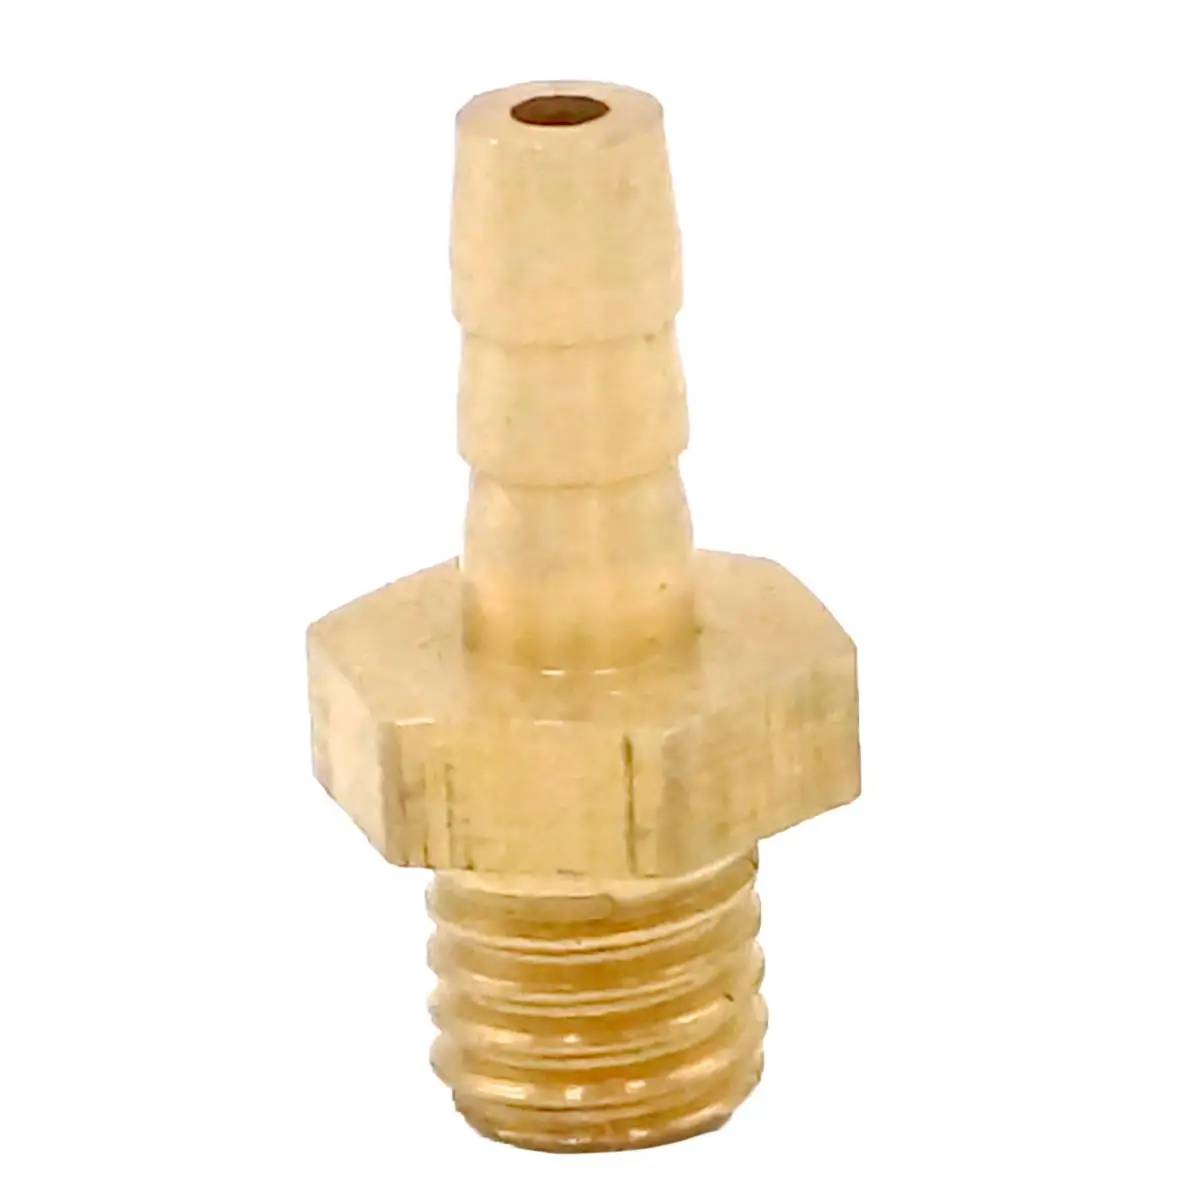 

Hose Barb Tail I/D 3mm x M5 Metric Male Thread Brass Pipe Fitting Connector Joint Copper Coupler Adapter